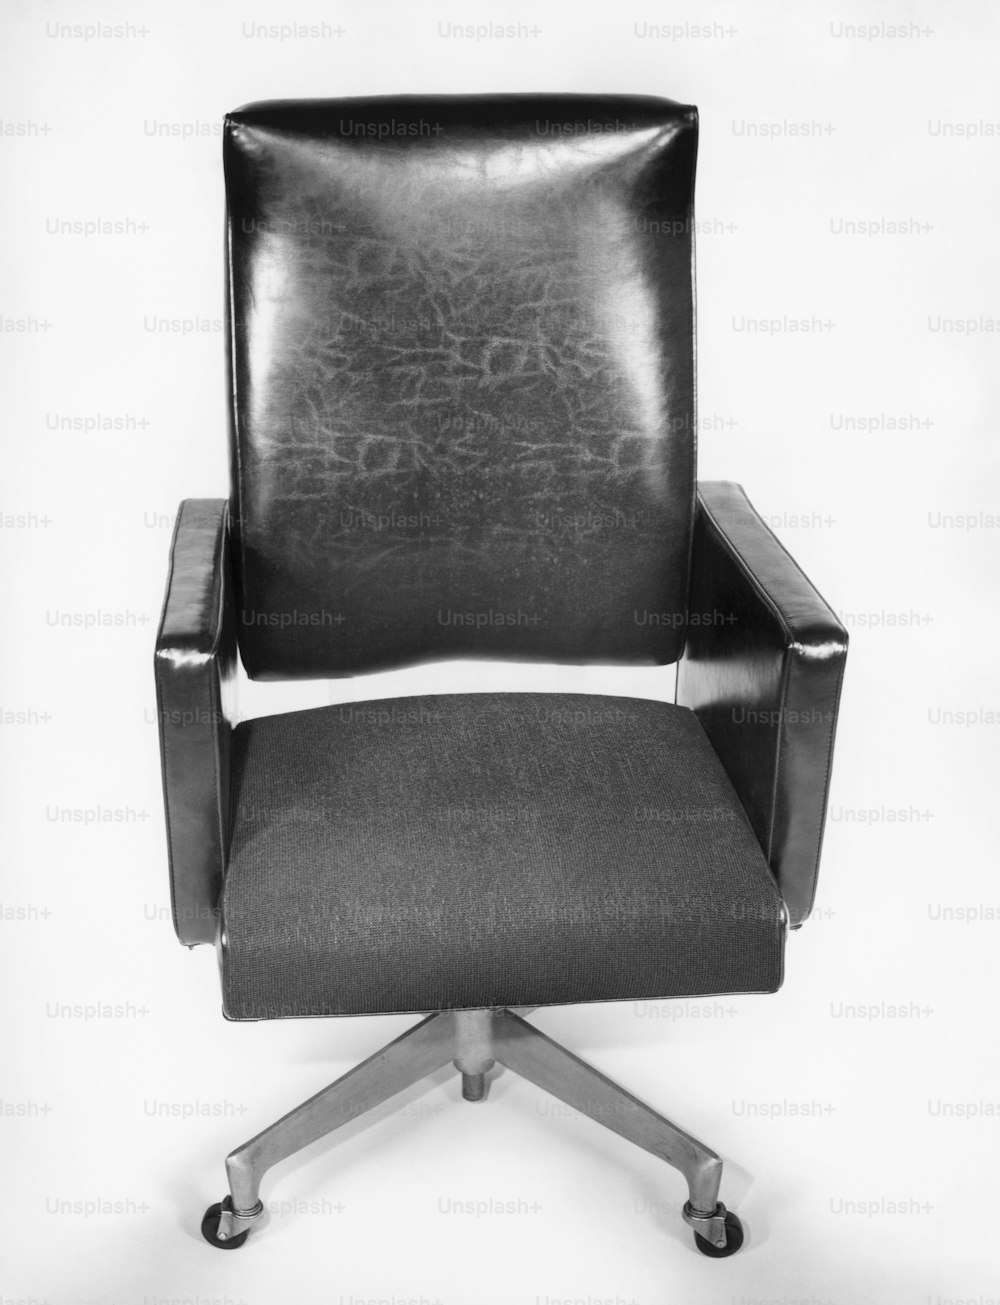 UNITED STATES - CIRCA 1950s:  Office chair.